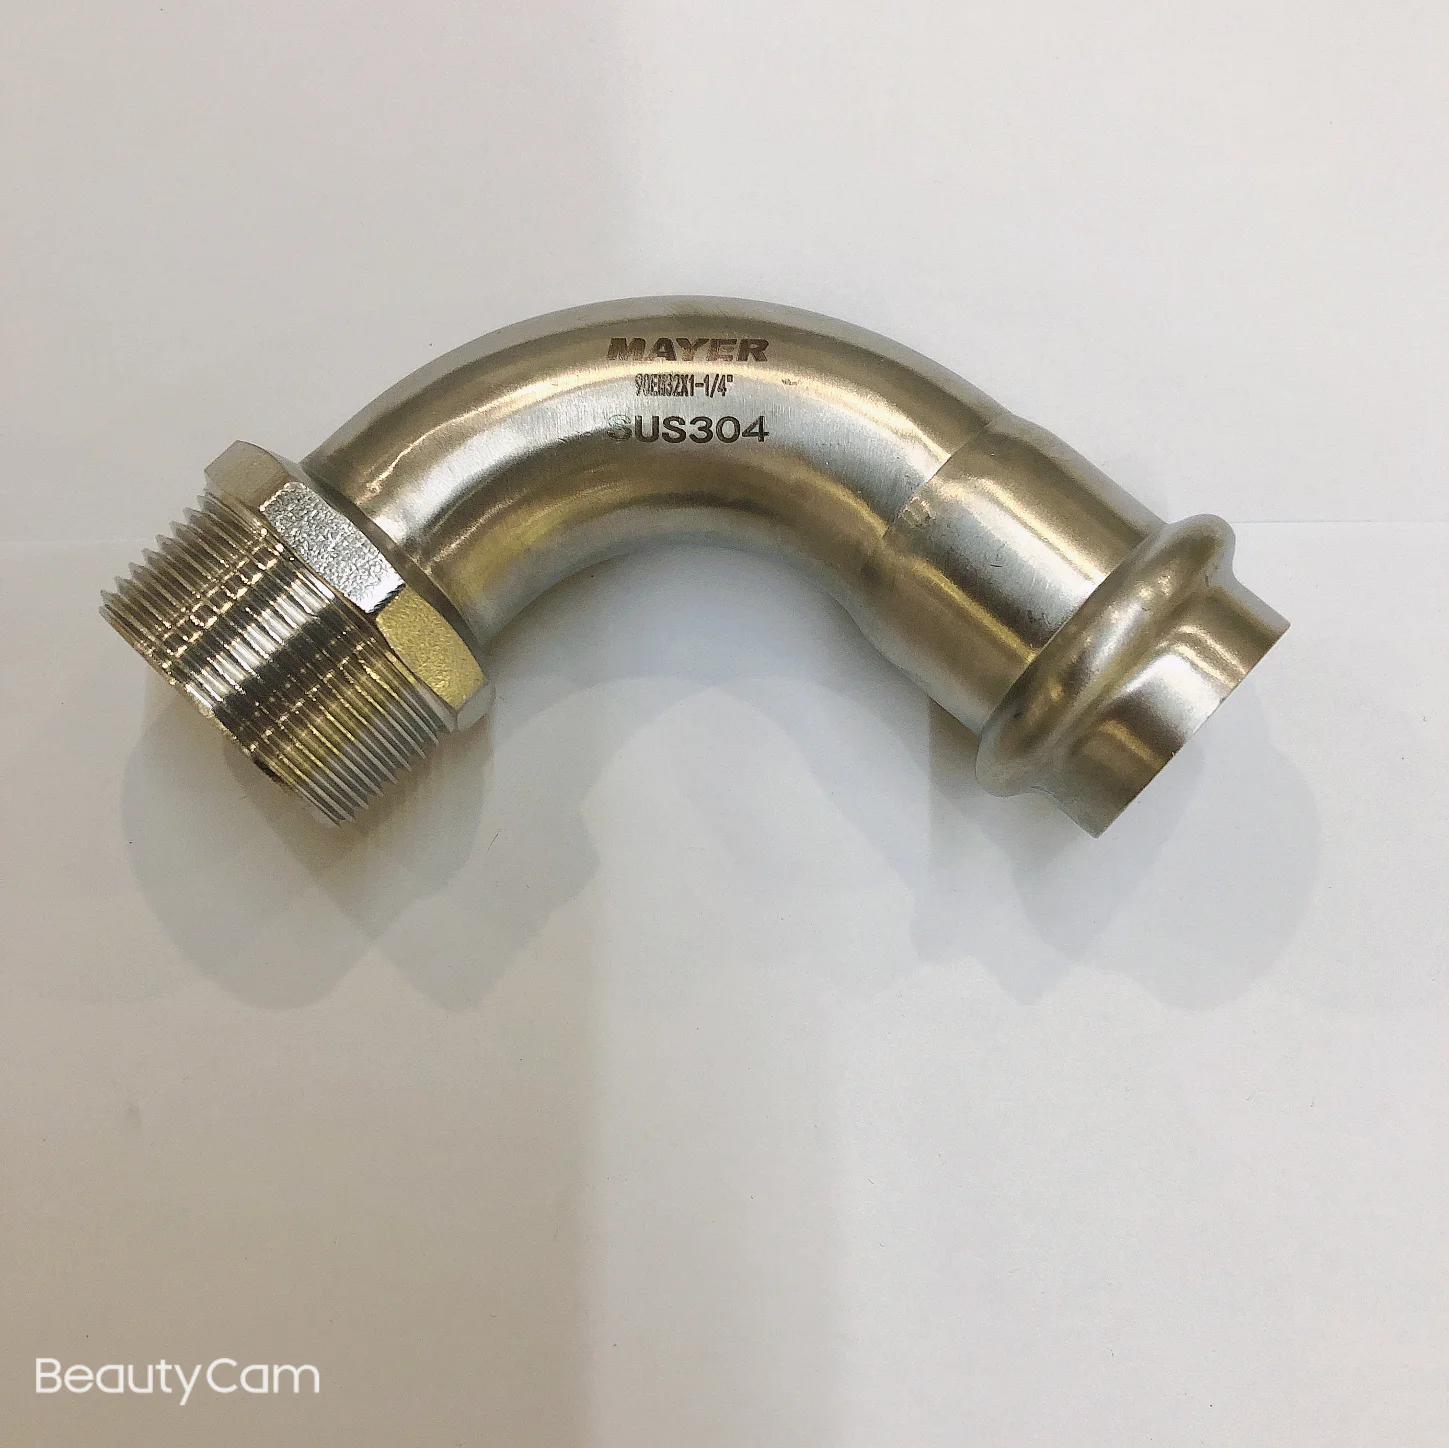 stainless steel 90 degree elbow male thread fitting application on construction